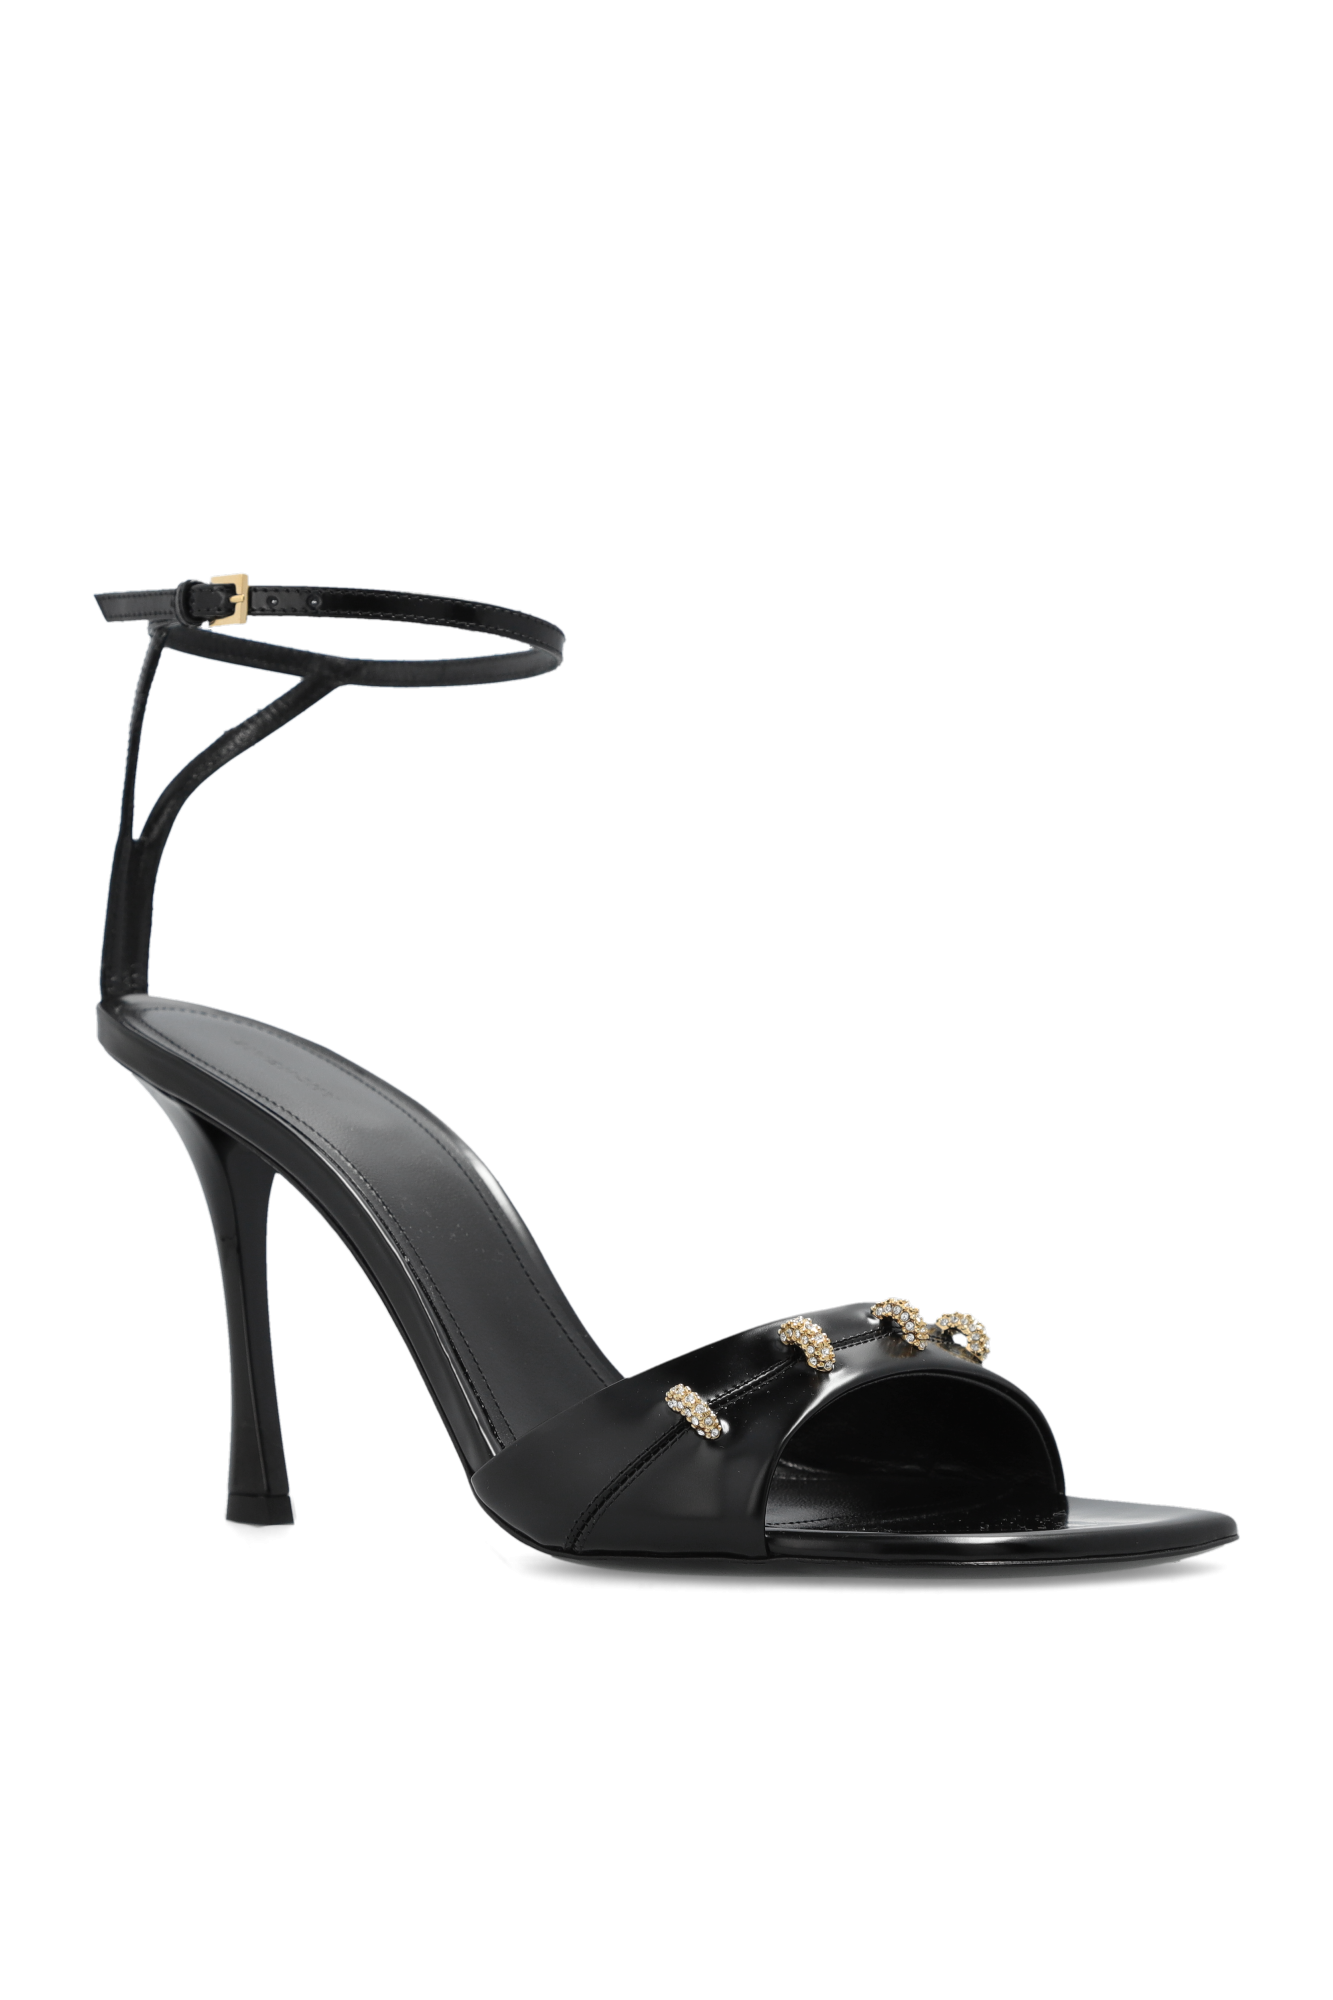 Givenchy ‘Stitch’ heeled sandals